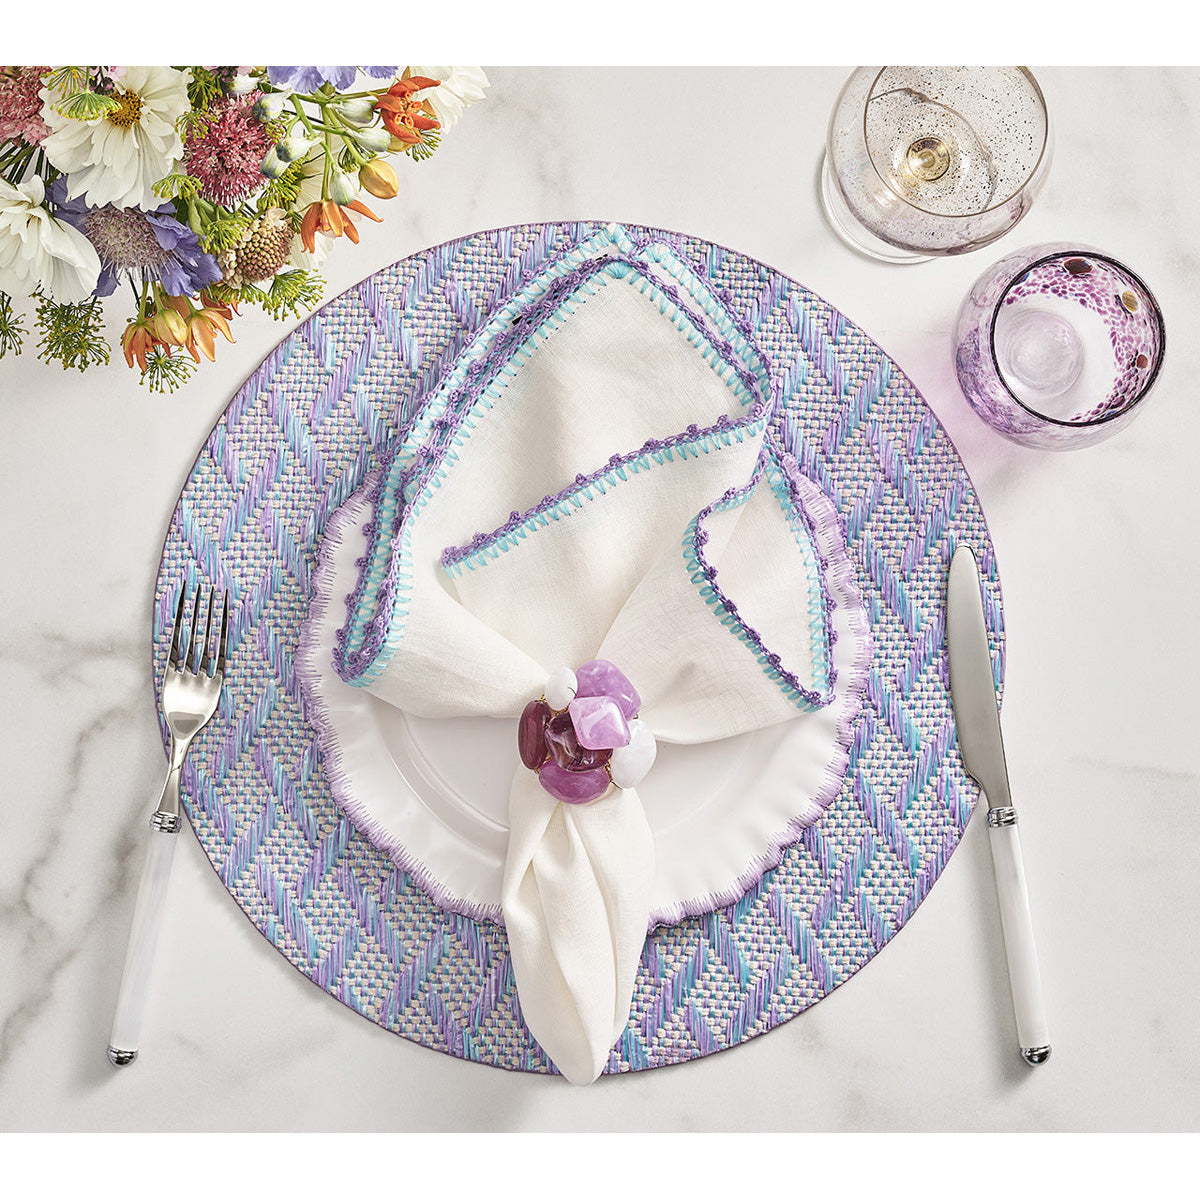 Knotted Edge Napkin - Set of 4 by Kim Seybert Additional Image-8